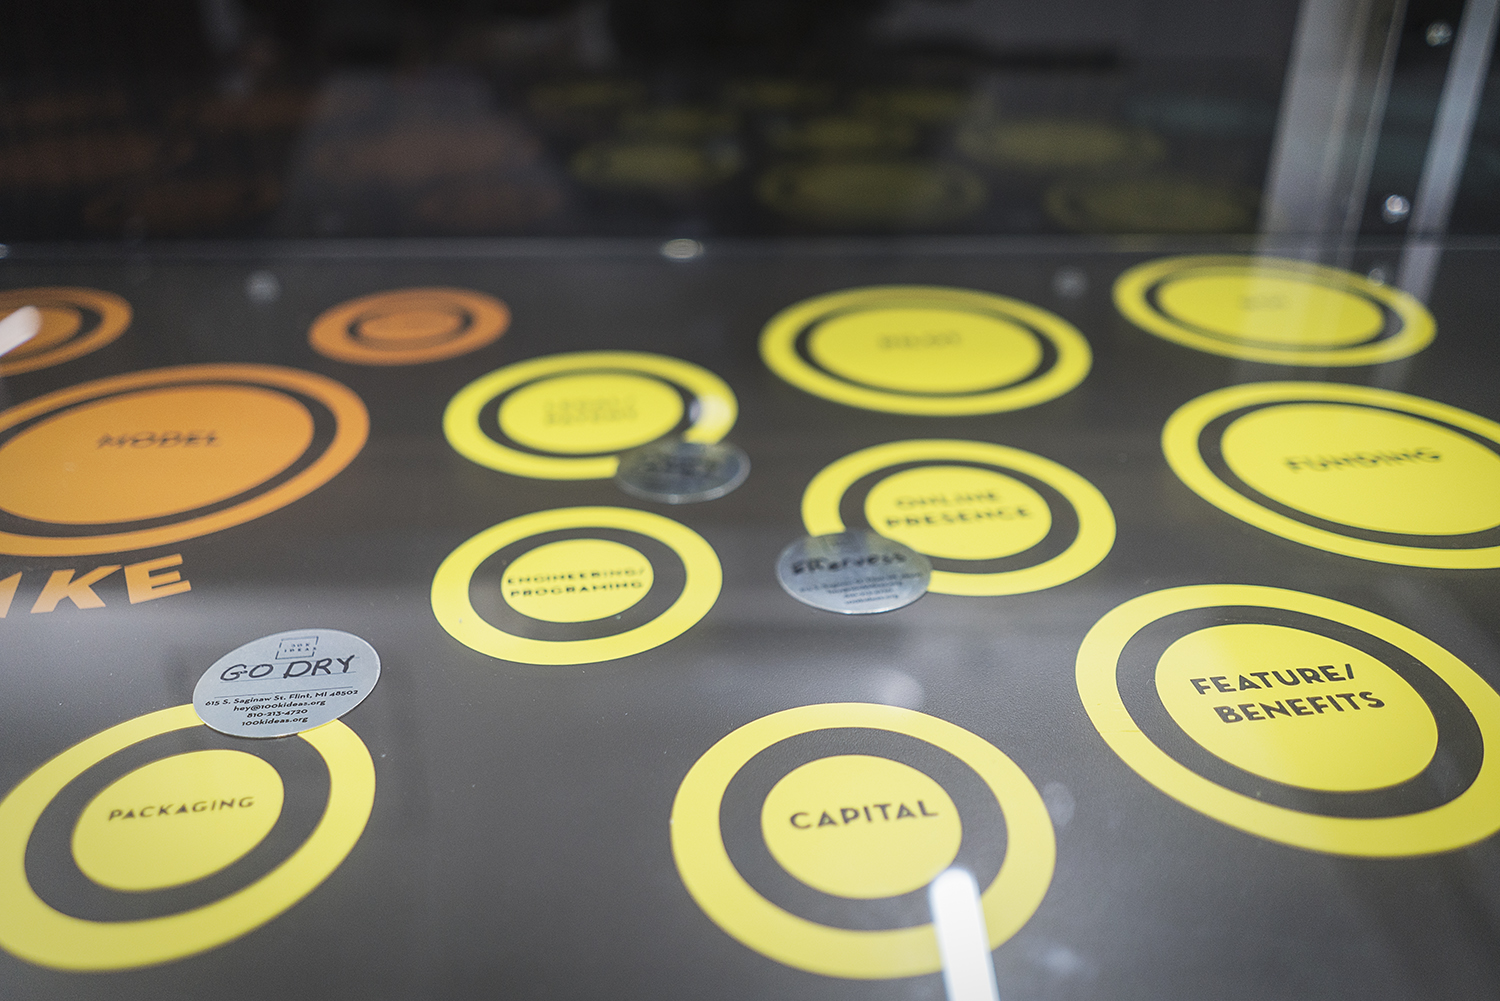 The game board at 100K Ideas tracks the progress of innovators' ideas as they work closer to going to market.